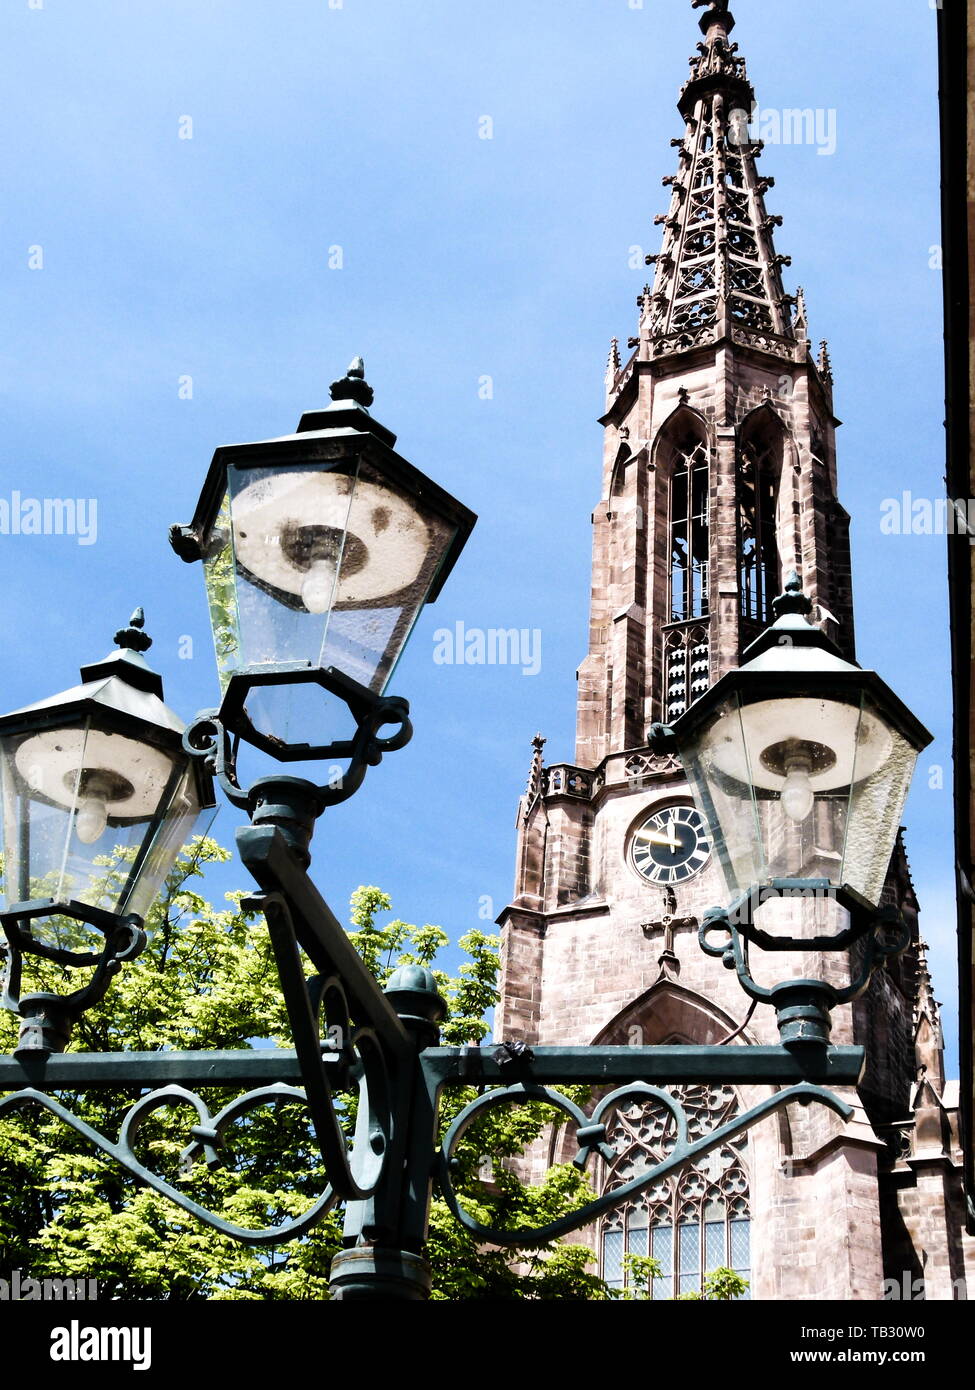 street lamp in retro style in front of neo-gothic church Stock Photo